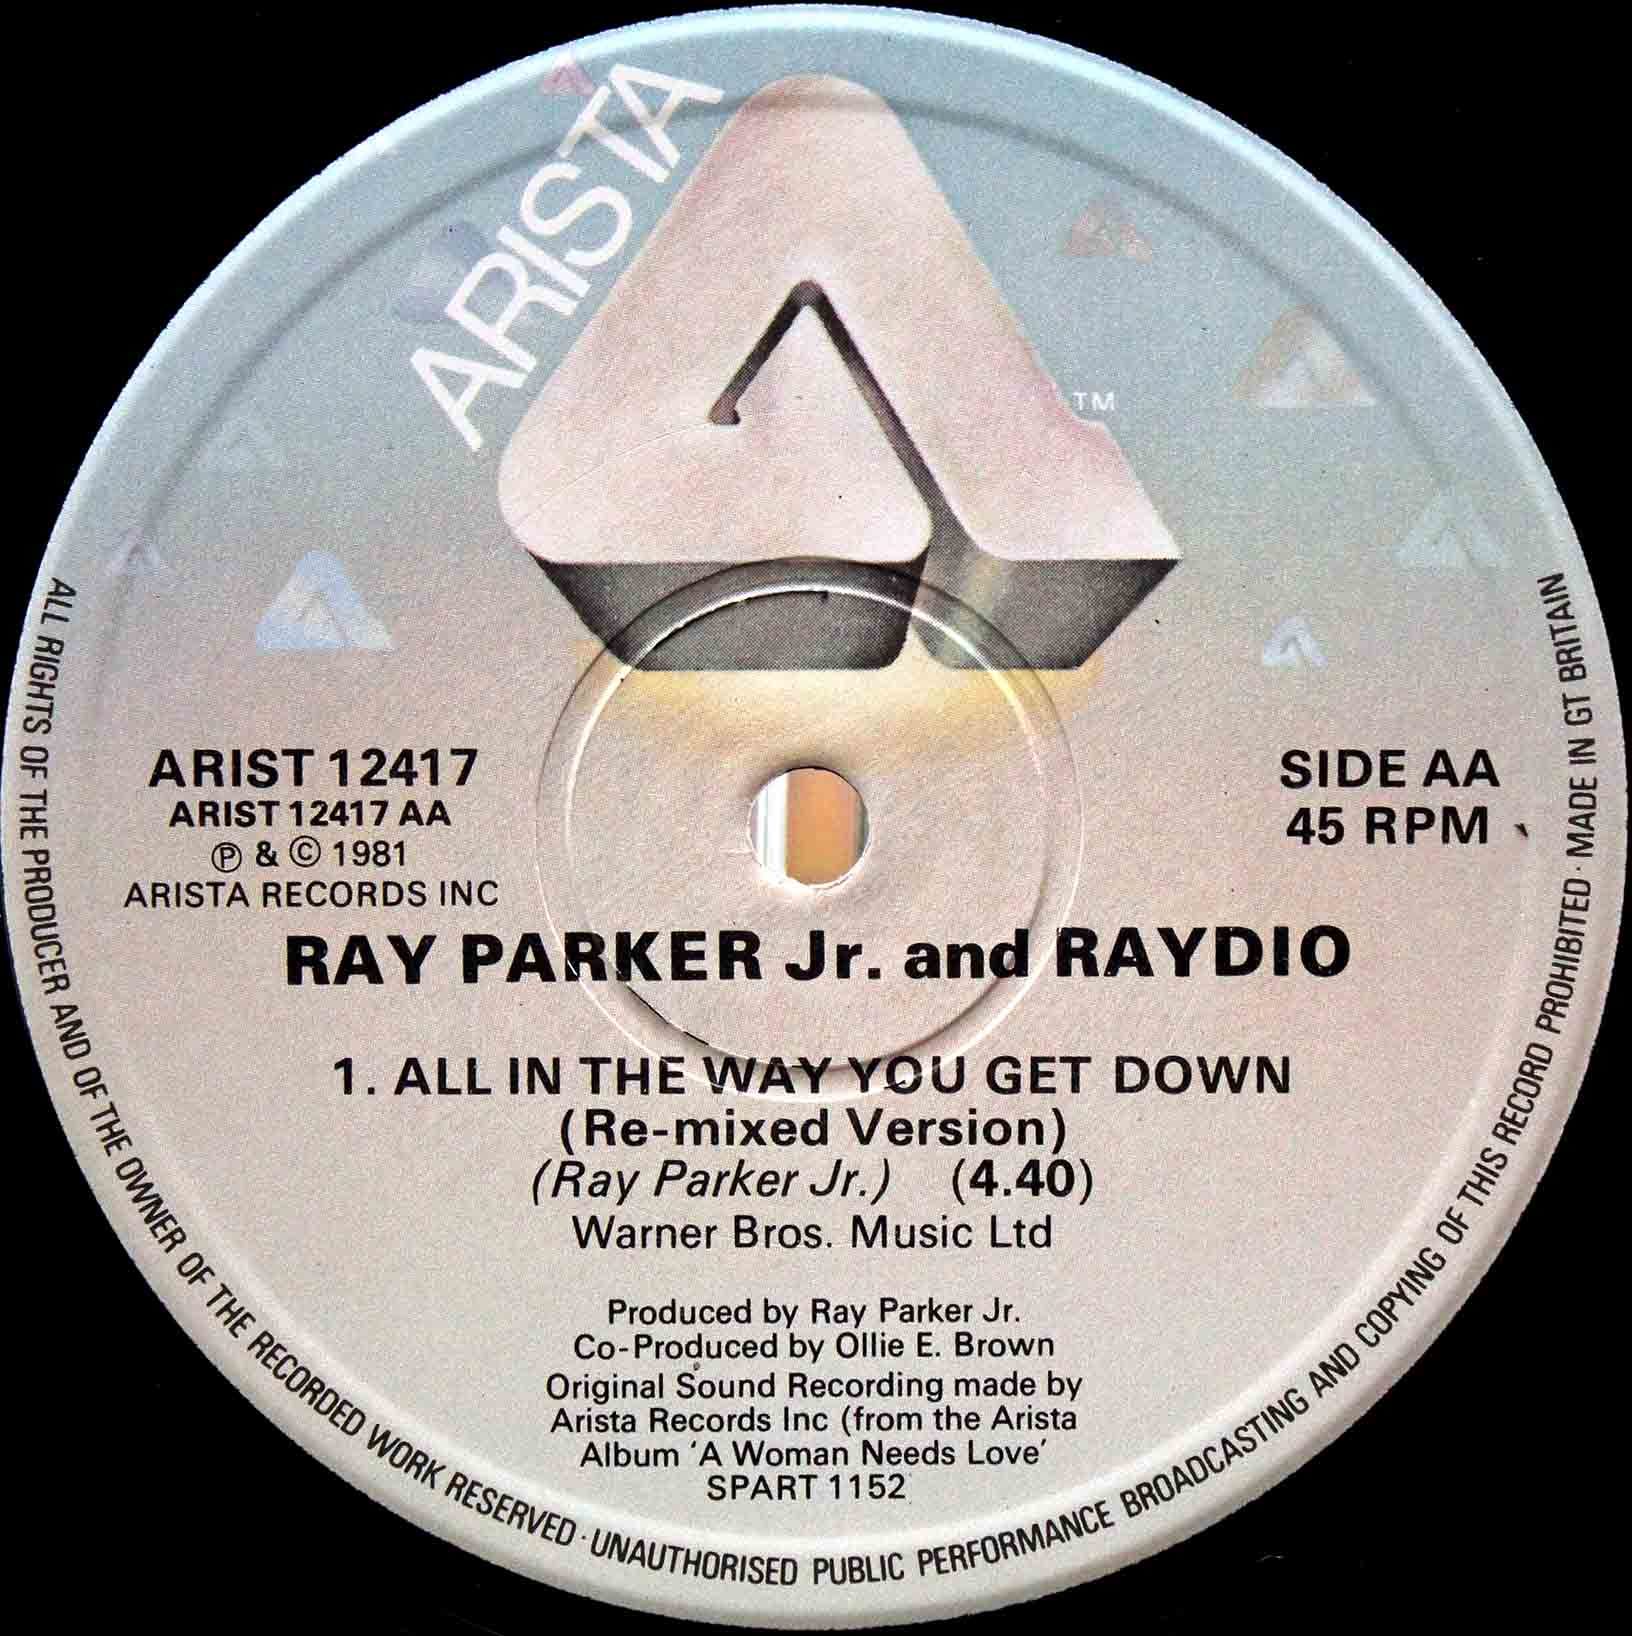 Ray Parker Jr Raydio - All In The Way You Get Down (UK Re-mixed Version) 02